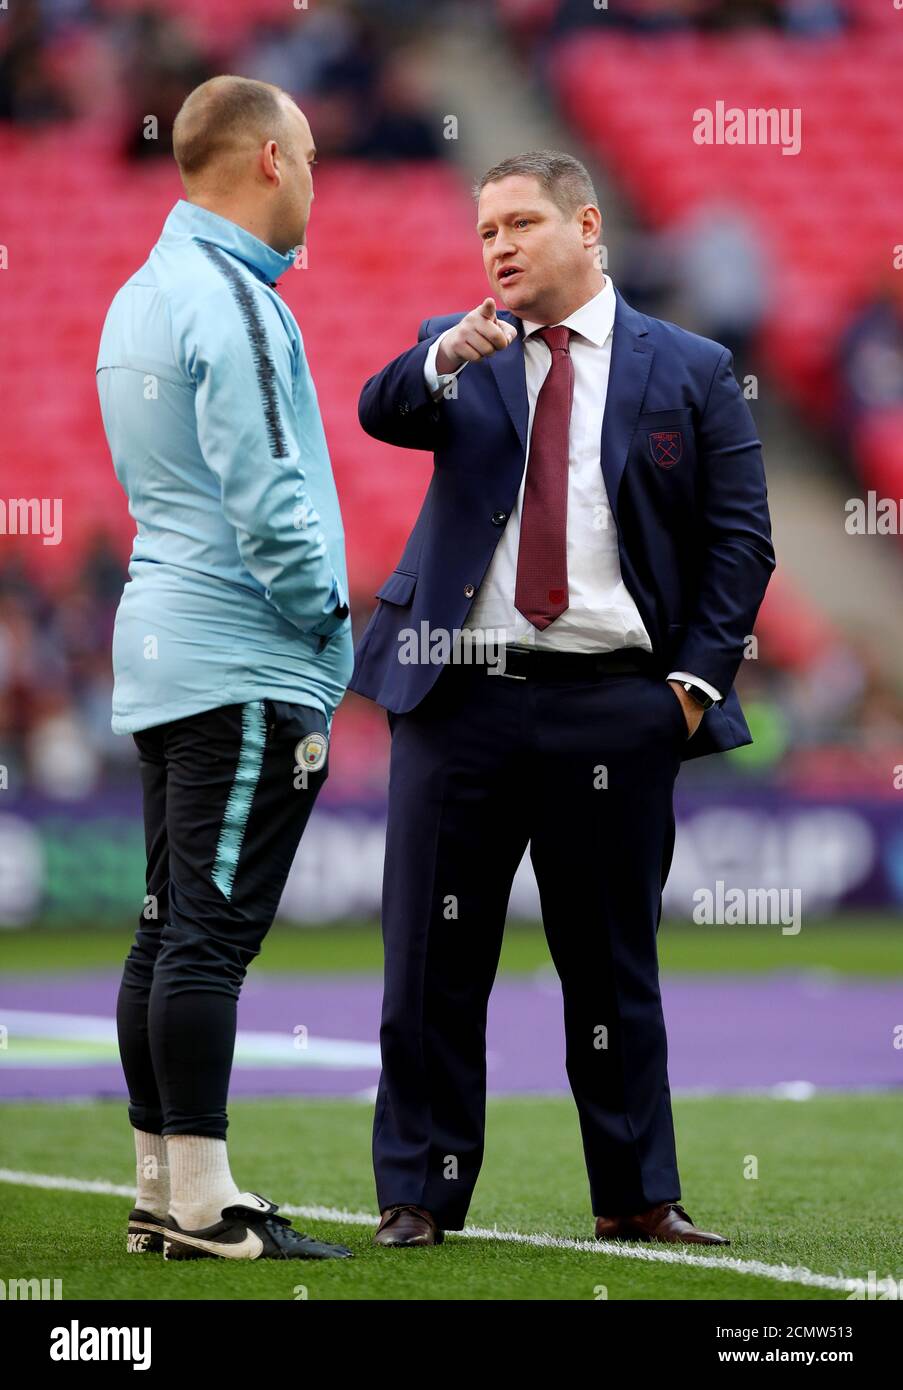 Soccer Football - Women's FA Cup Final - West Ham United v Manchester City - Wembley Stadium, London, Britain - May 4, 2019  Manchester City manager Nick Cushing with West Ham manager Matt Beard before the match   Action Images via Reuters/Peter Cziborra Stock Photo